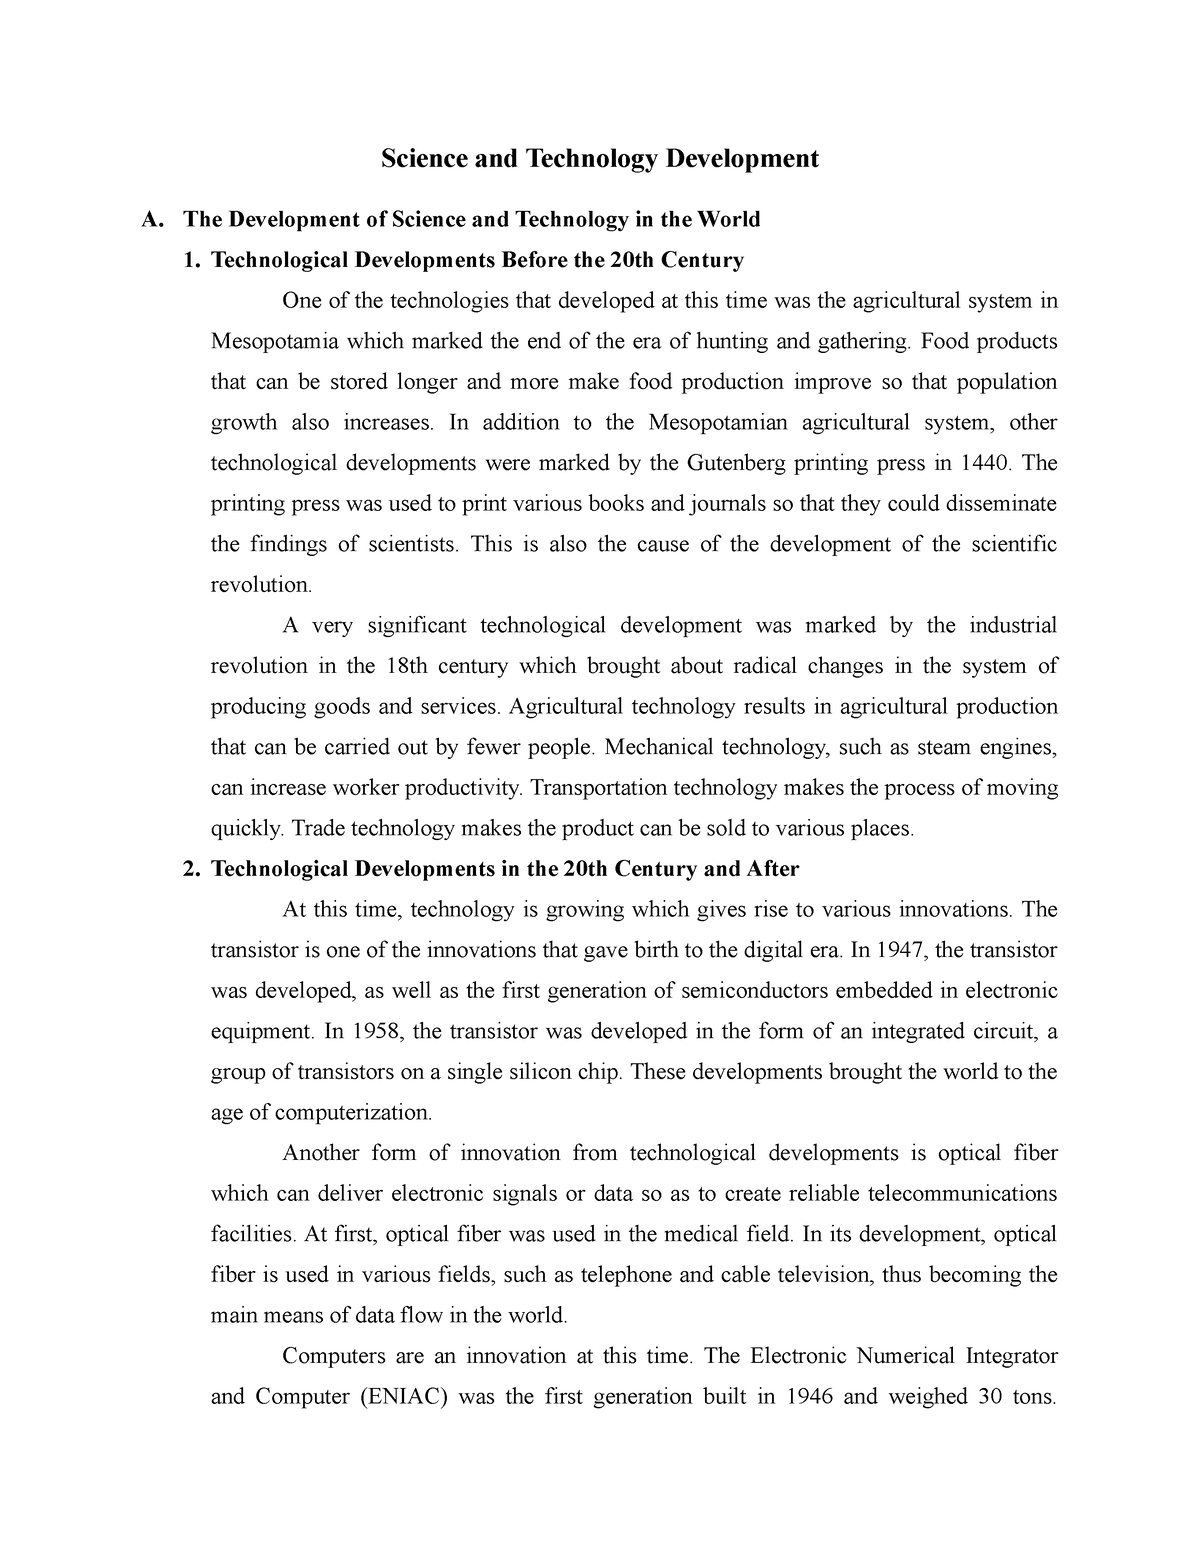 science and technology are key drivers to development essay